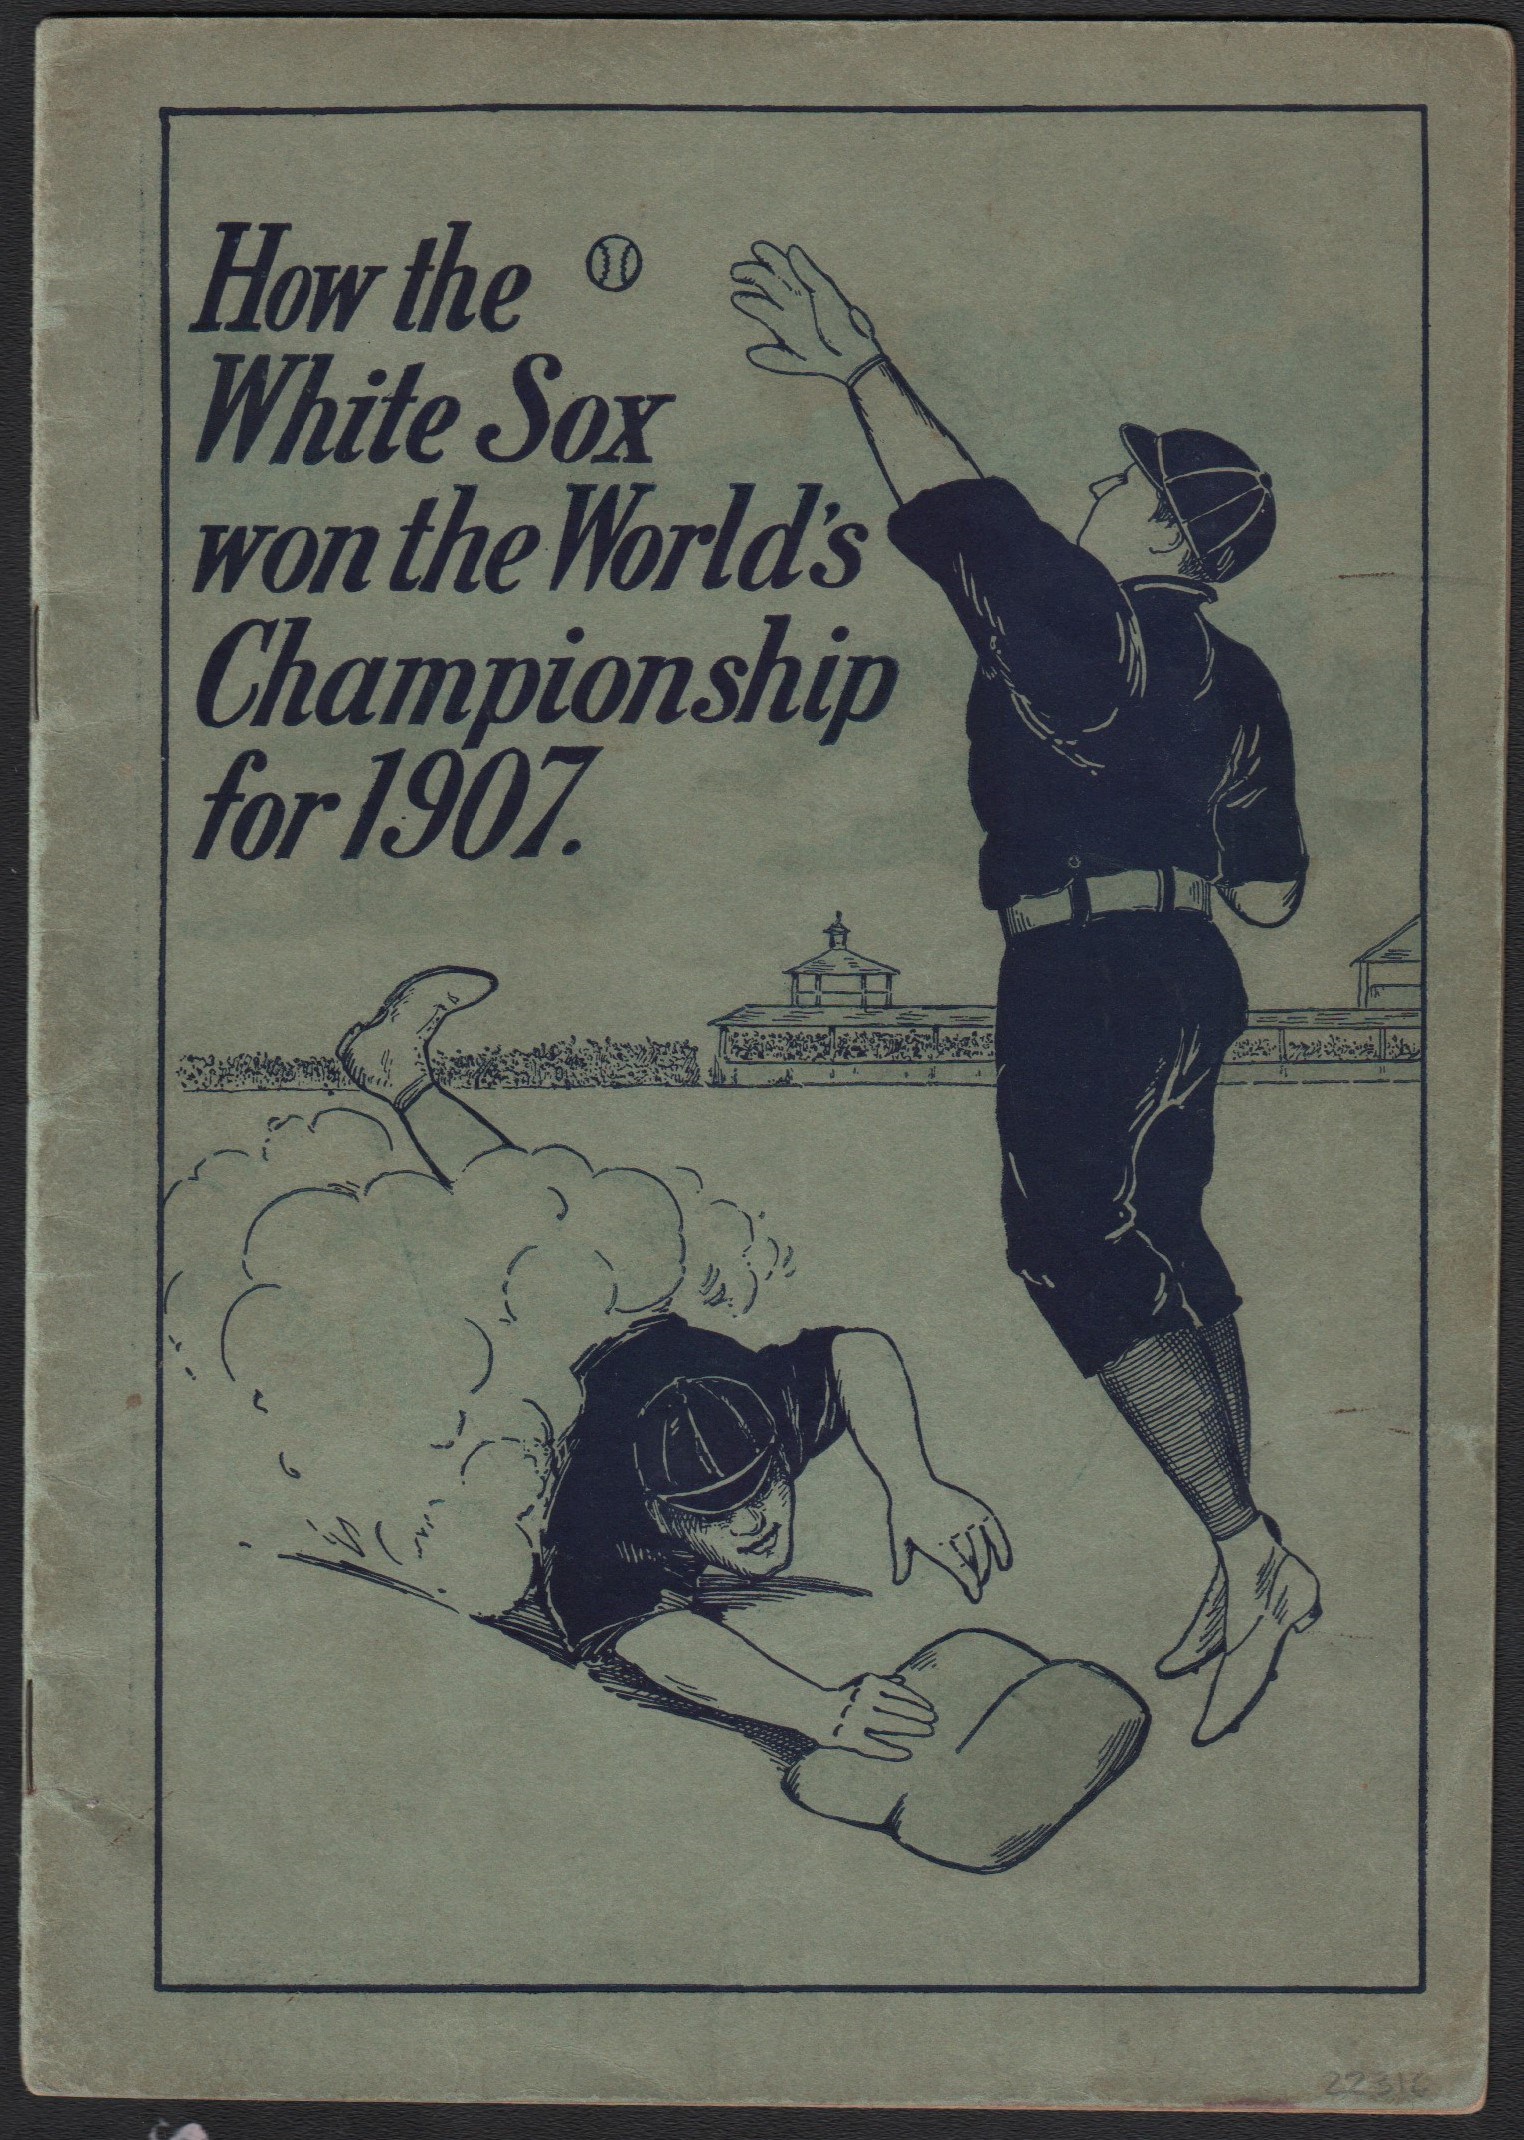 Early Baseball - How the White Sox won the World's Championship for 1907